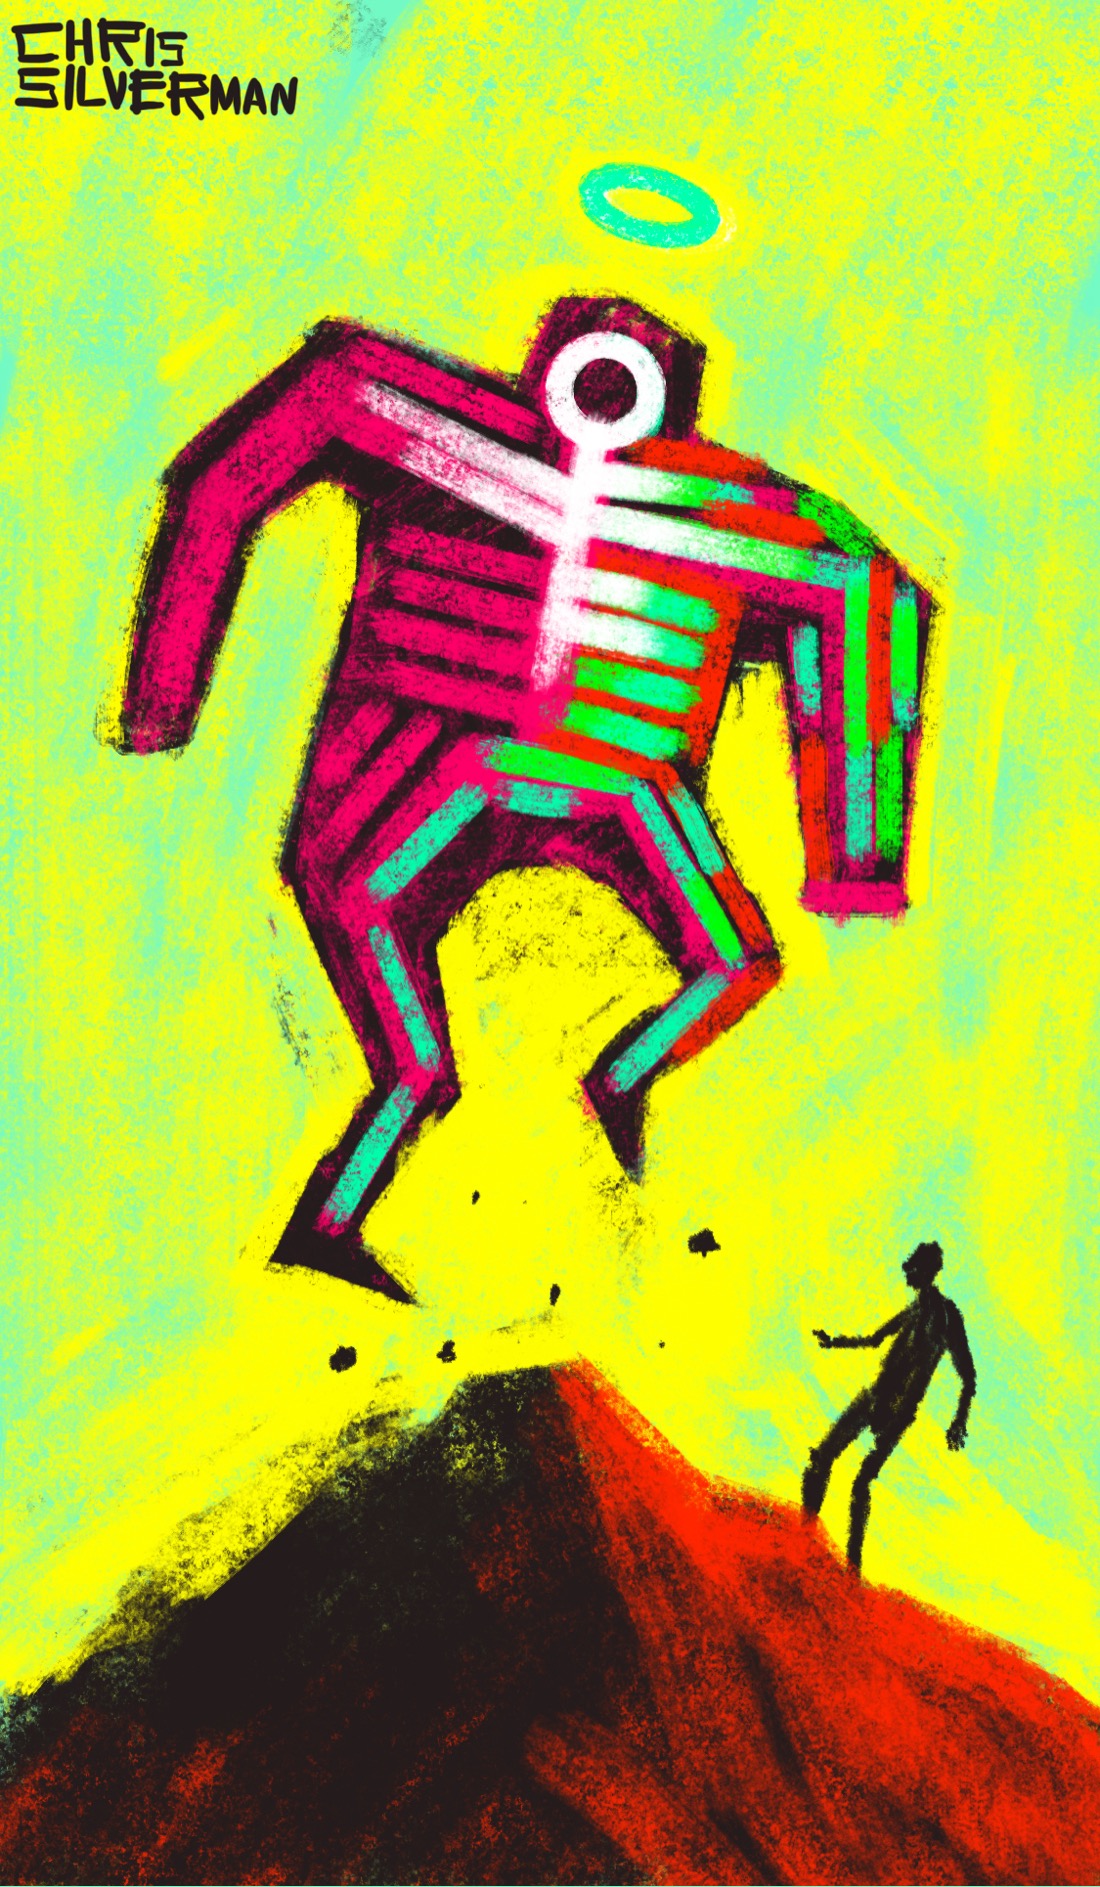 A mountaintop, lit red on the right side, with a small figure of a person also standing on the right side, looking taken aback. The person is staring at a huge, inhumanly colored figure, covered with colored bars that vaguely suggest a skeleton. Perhaps the bars are painted on the outside of the figure, or showing through from inside. They are neon colors: pink, blue, and green, with the figure's head and chest area a glowing white. The giant figure has a green halo above its head, and appears to be leaping into the air. The sky behind it is an apocalyptic yellow-green. And what rough beast, its hour come round at last, slouches towards Bethlehem to be born?